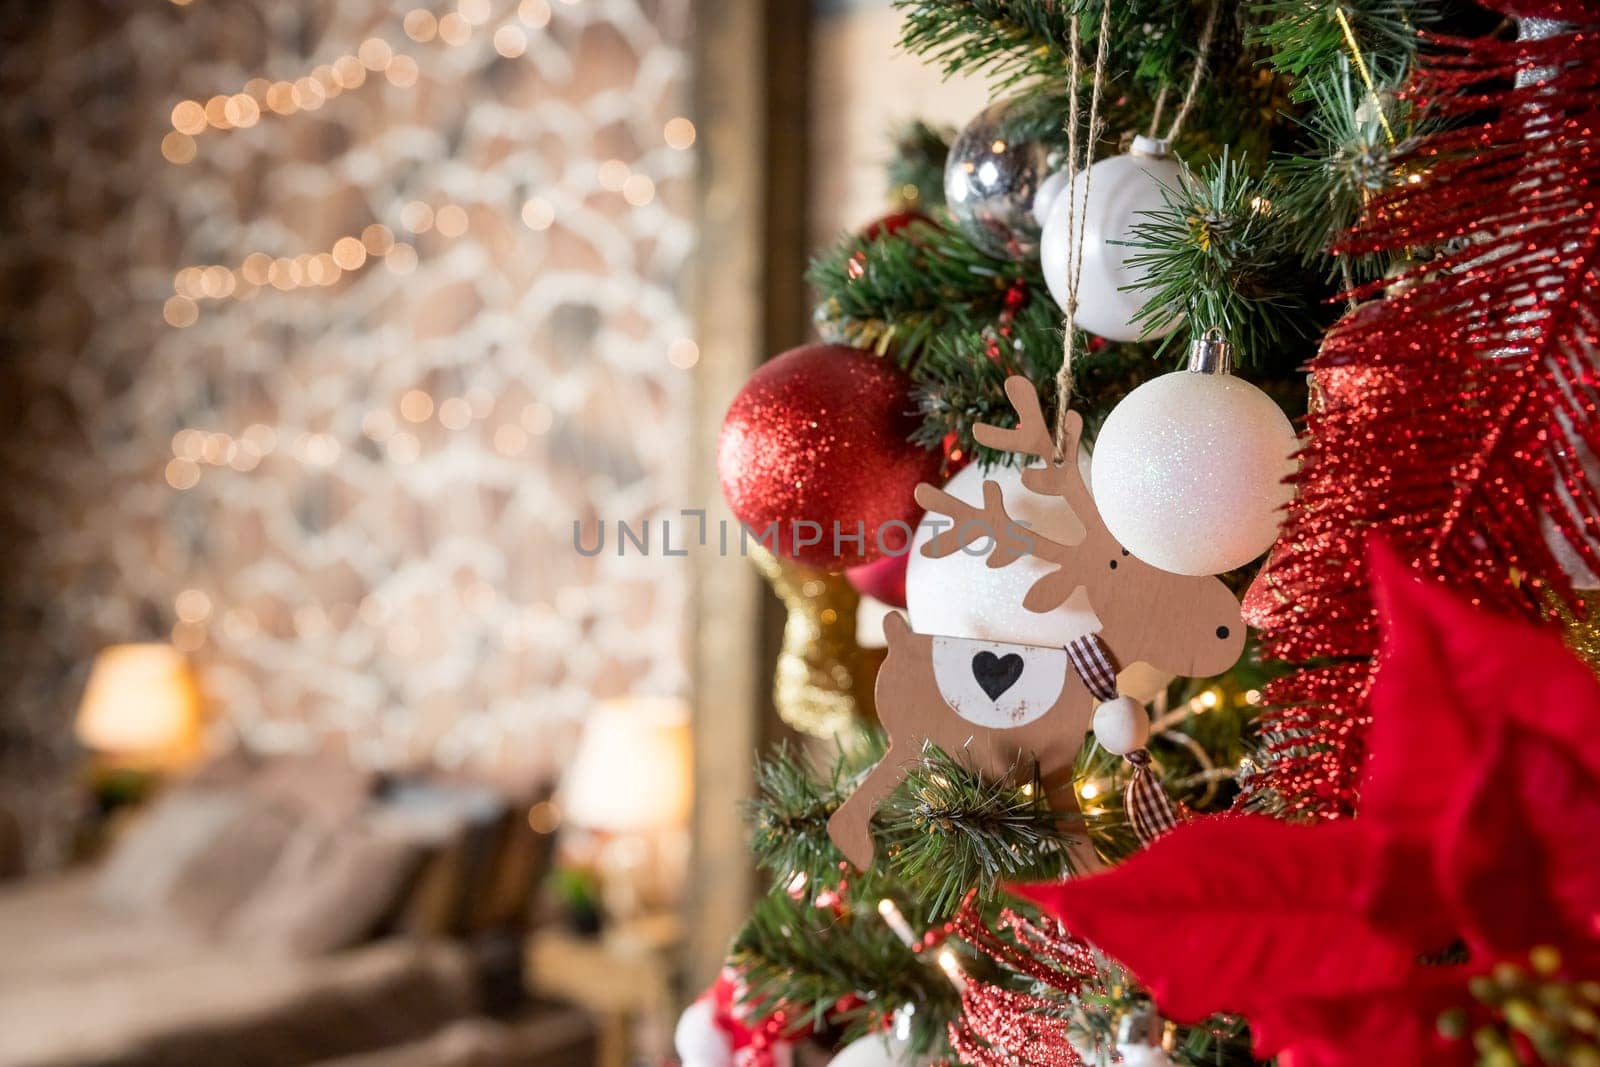 Magic glowing tree. Christmas home interior with Christmas tree. Red and white balls hanging on pine branches. Festive lights in the brick wall background.